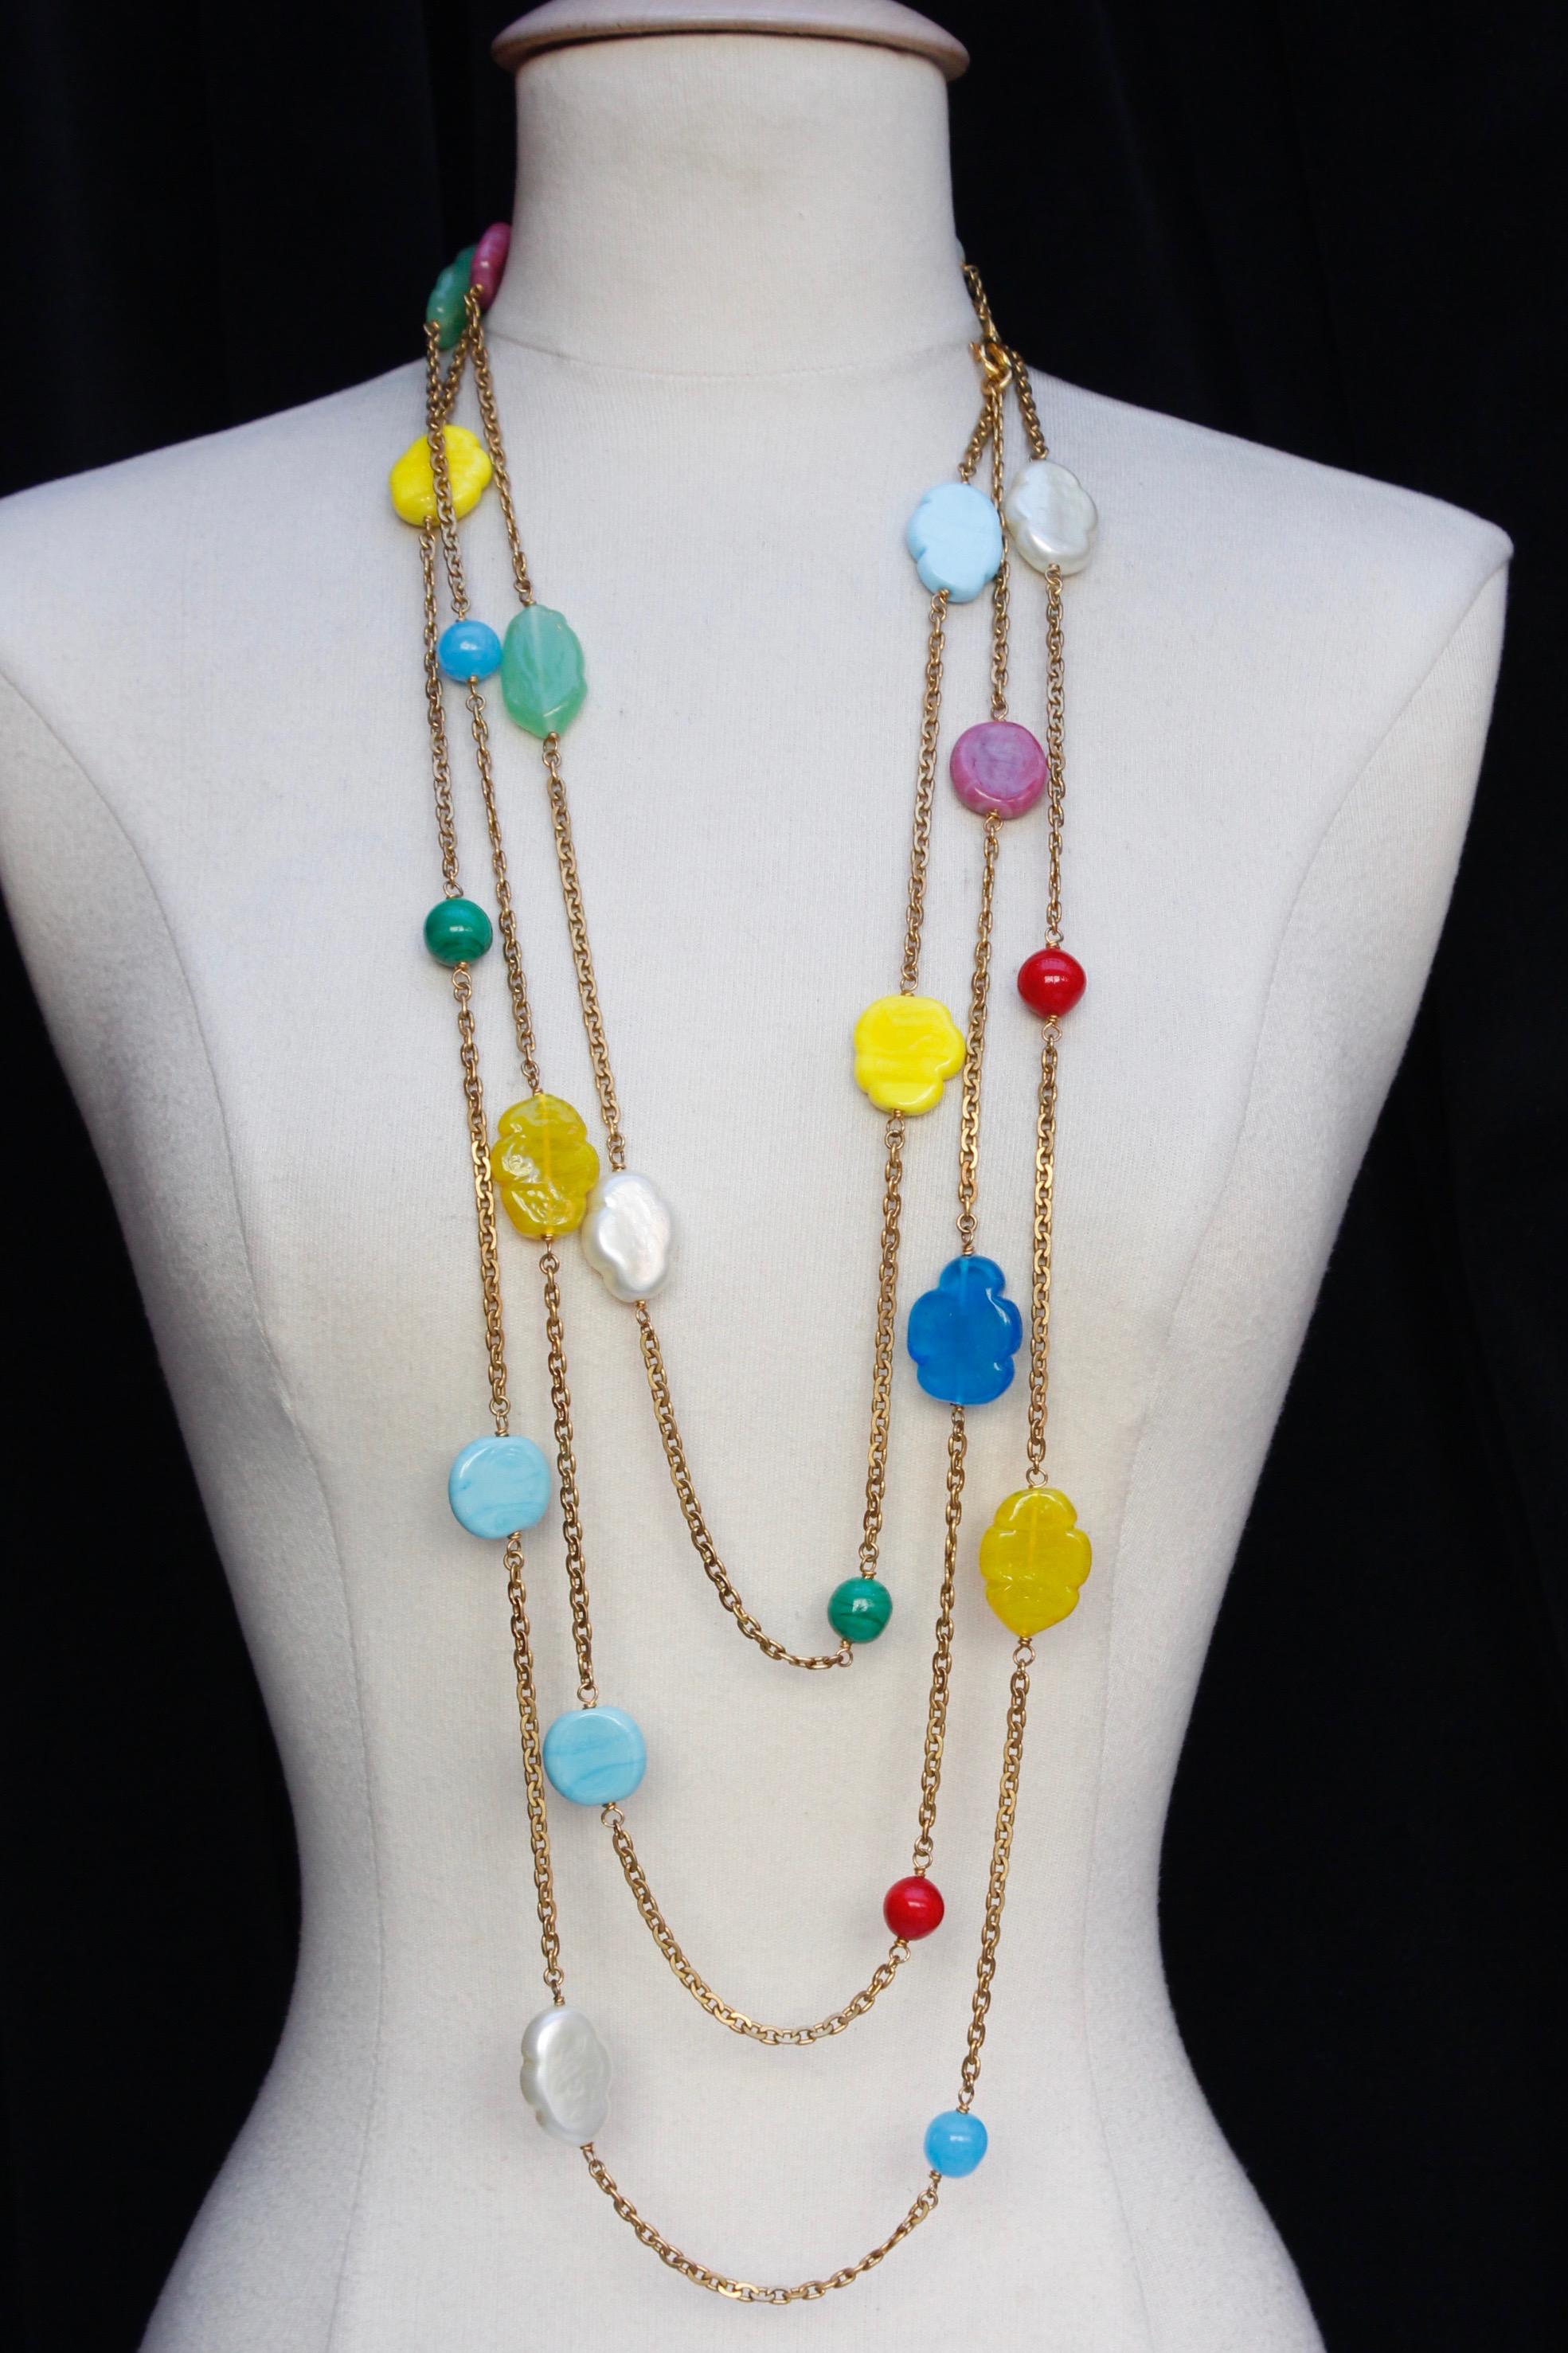 CHANEL (Made in France) Beautiful necklace comprised of a gilted metal chain and adorned by glass paste beads and glass paste cloud-shaped elements. Elements are made with bright colours as blue, pink, green, red, yellow and white.

From 1990s